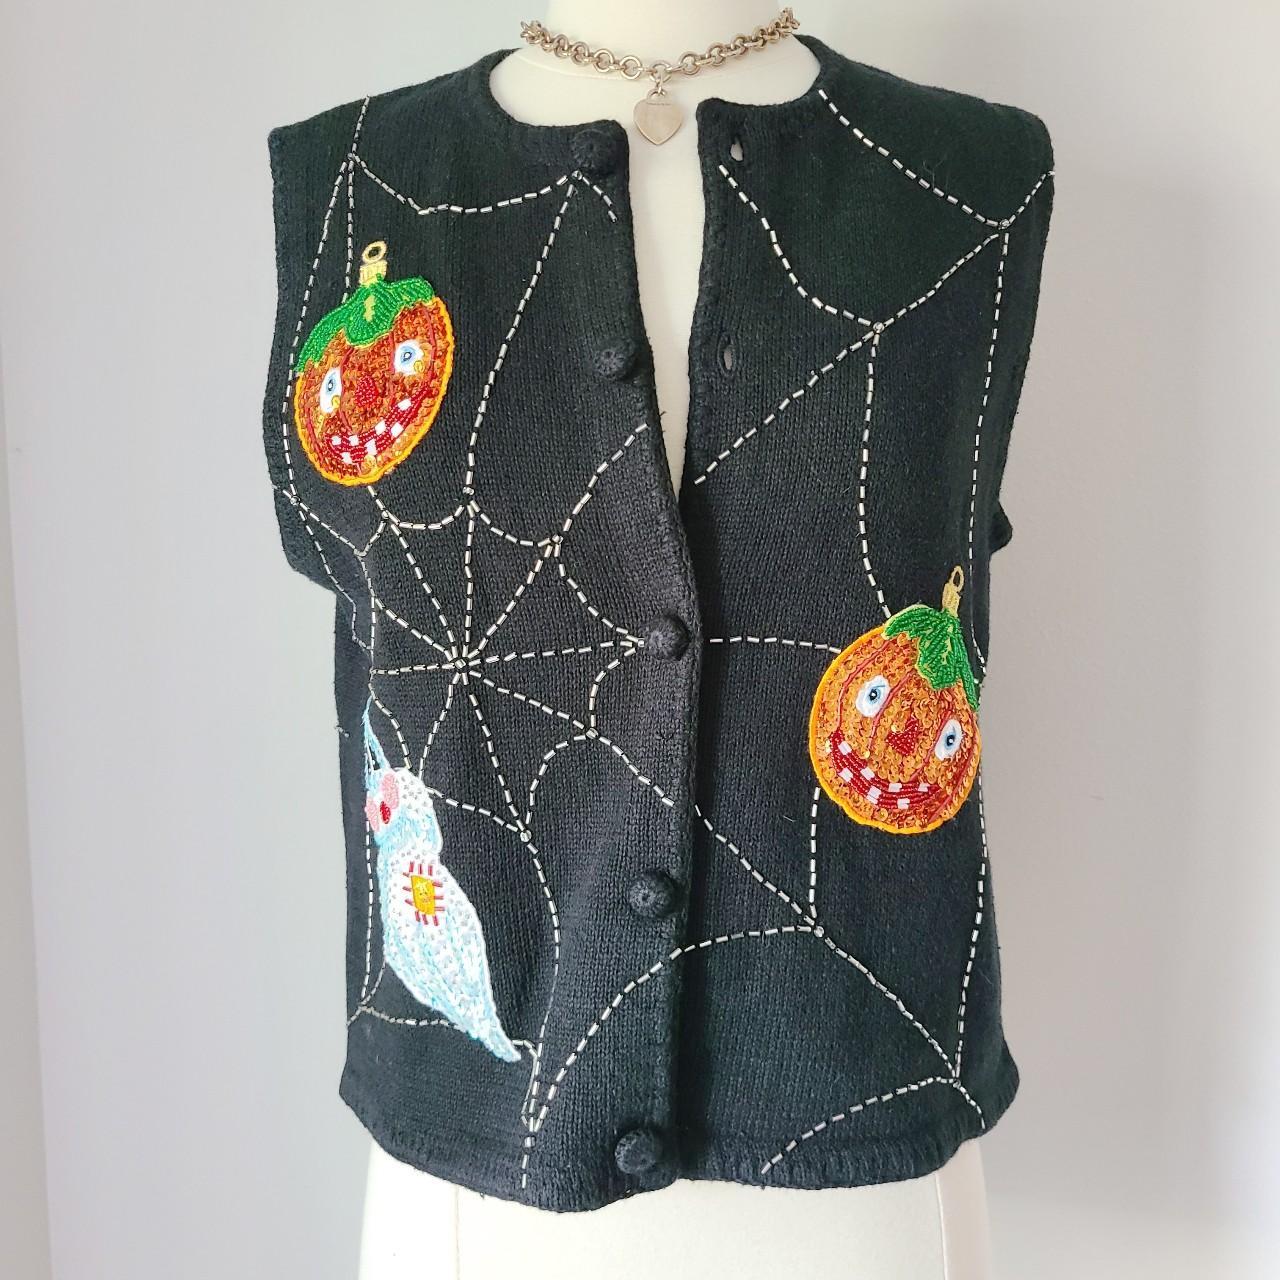 Product Image 2 - Vintage 90s Embroidered Halloween Sweater